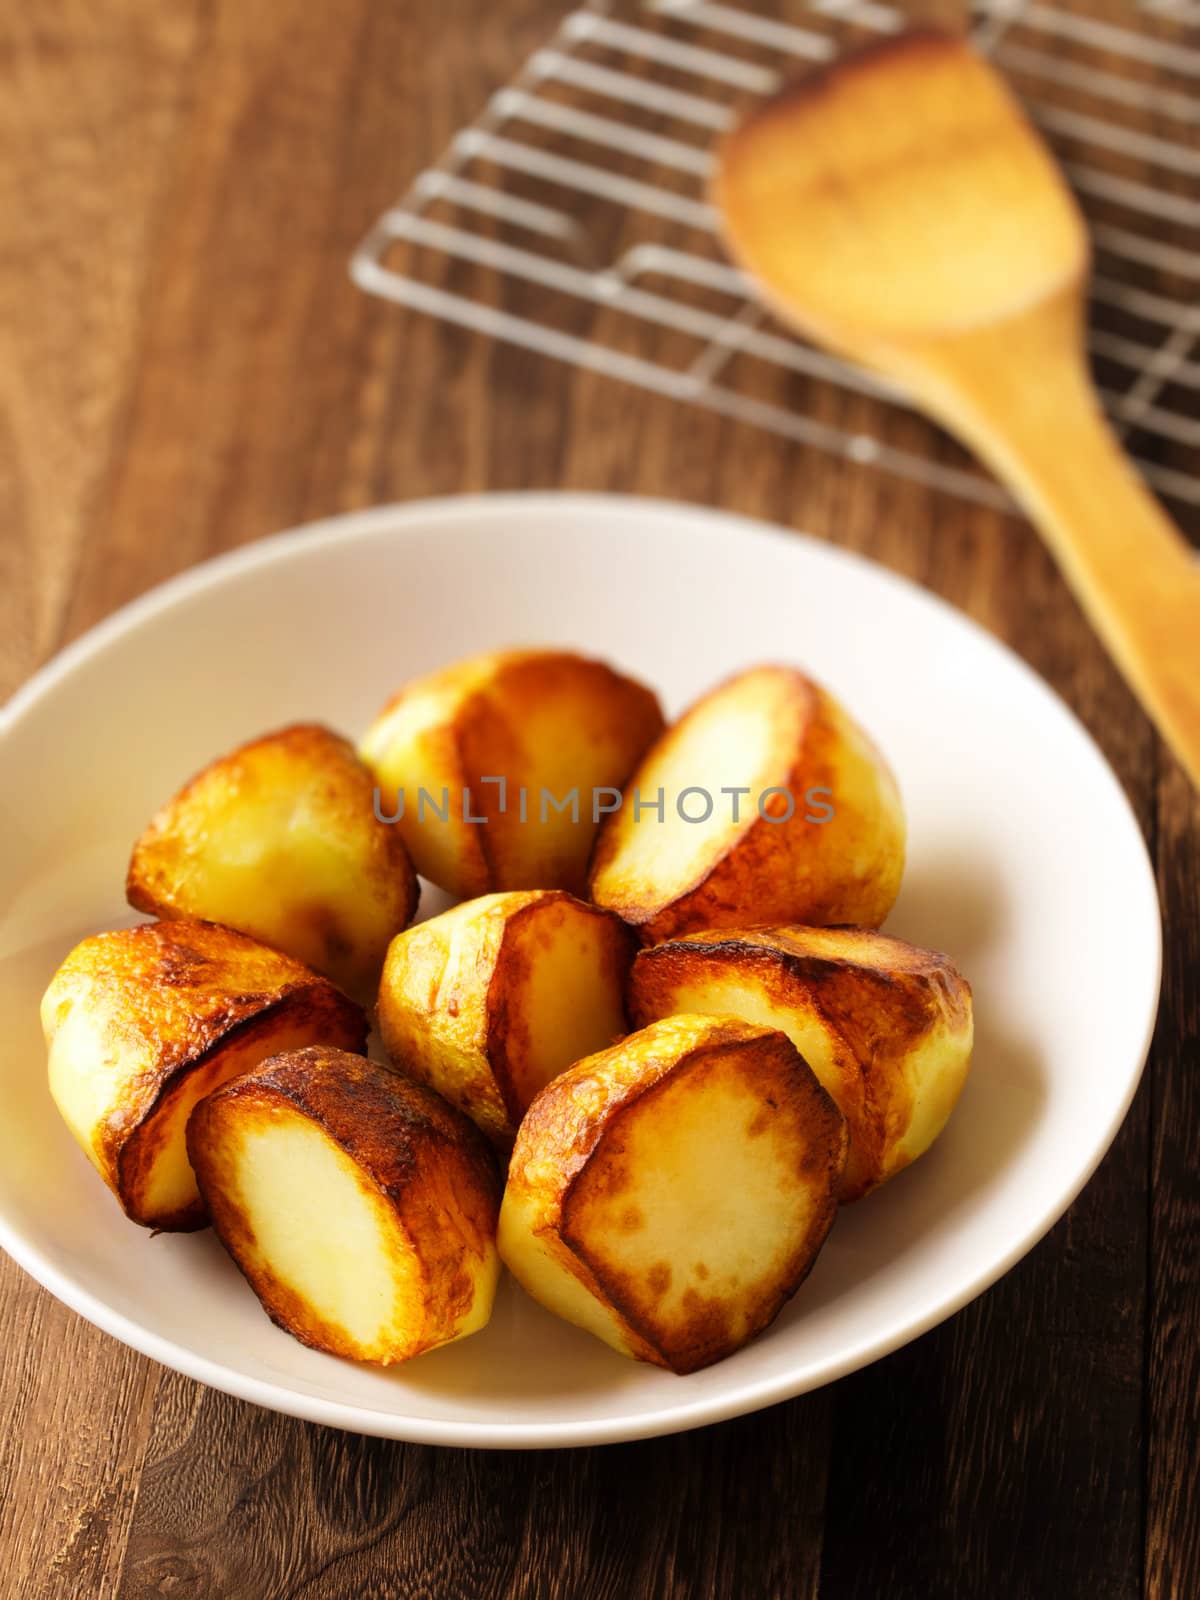 roasted potatoes by zkruger